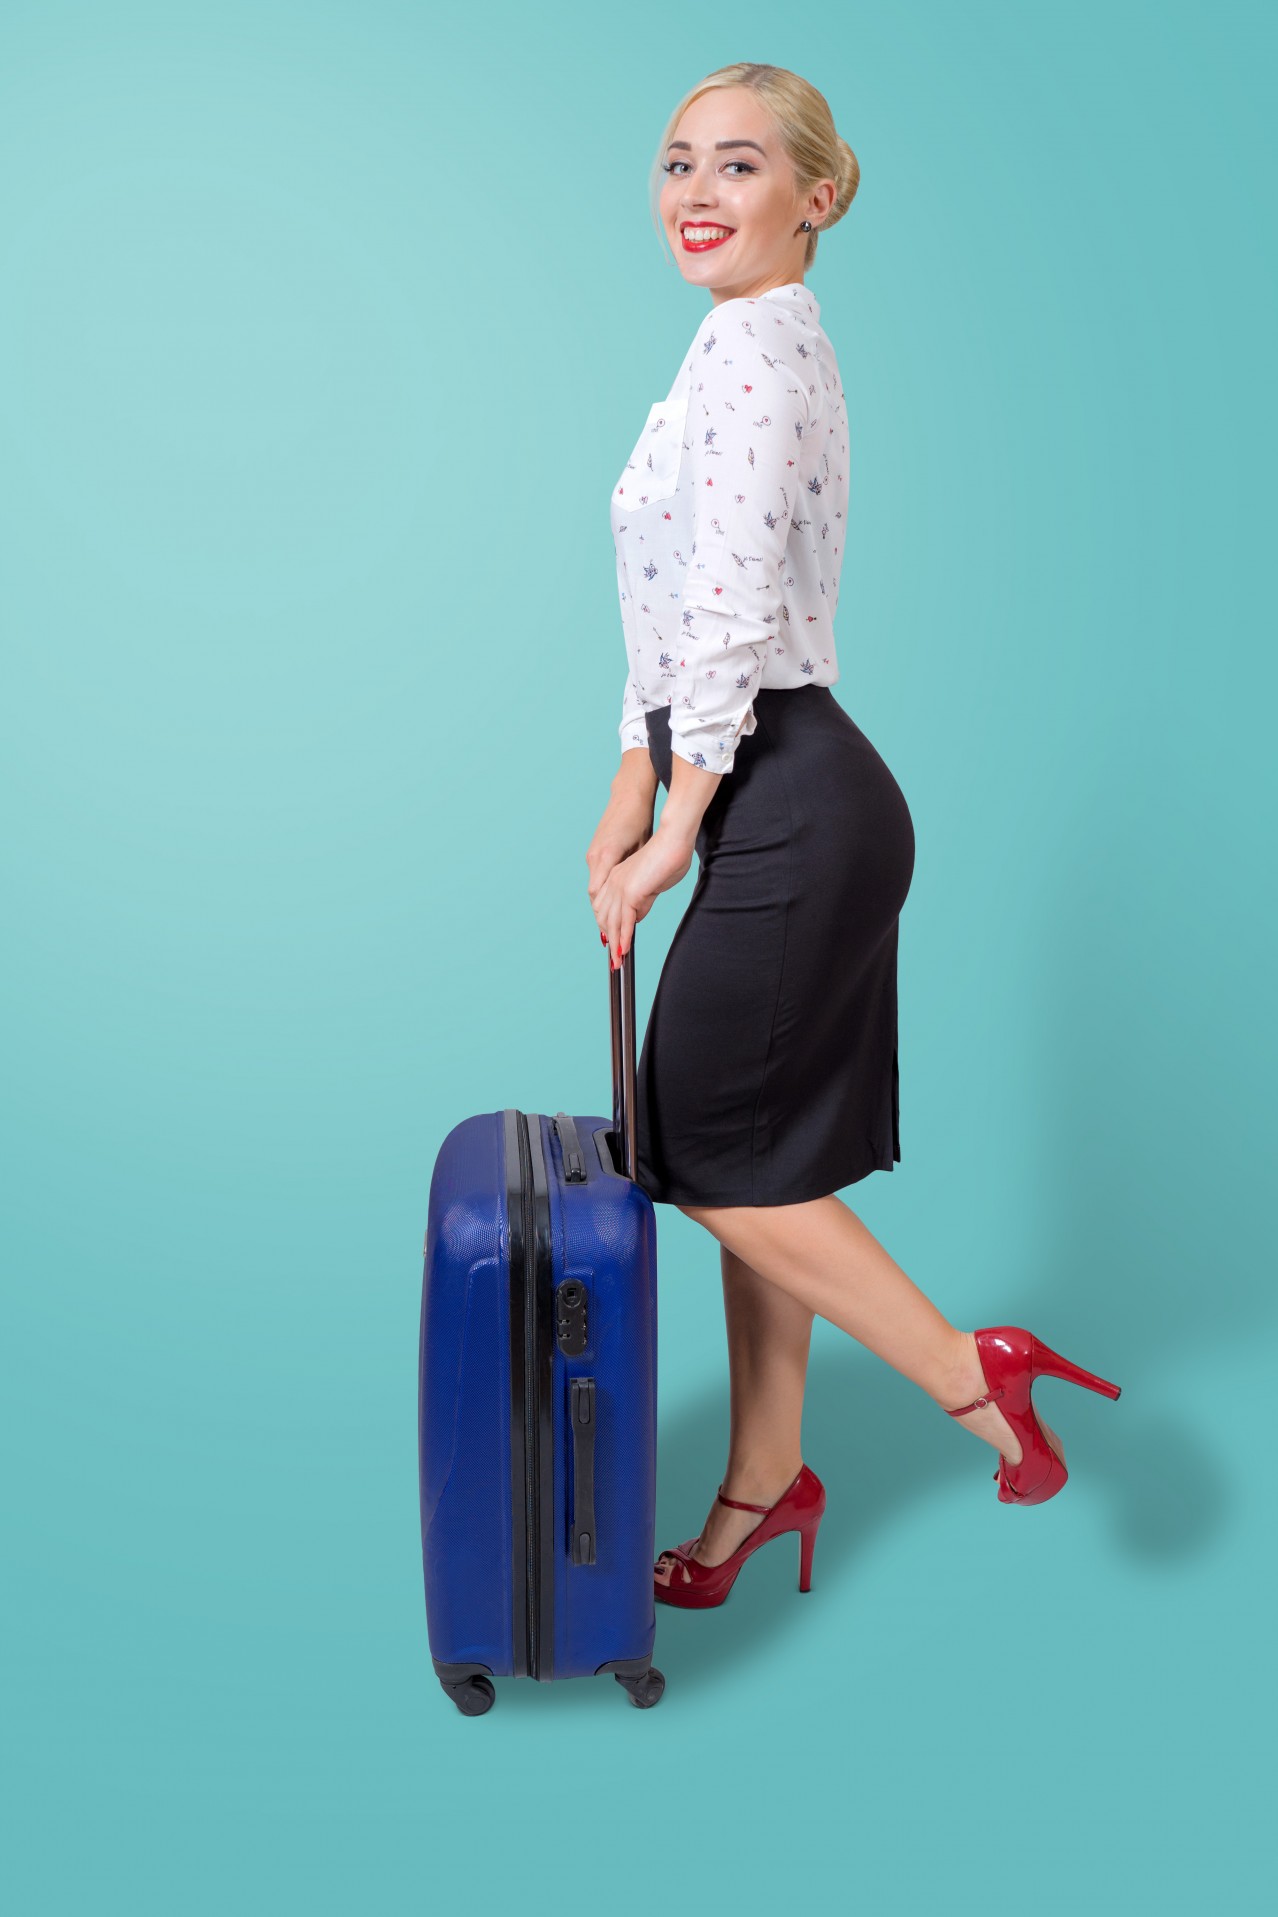 Smiling business woman with travel suitcase